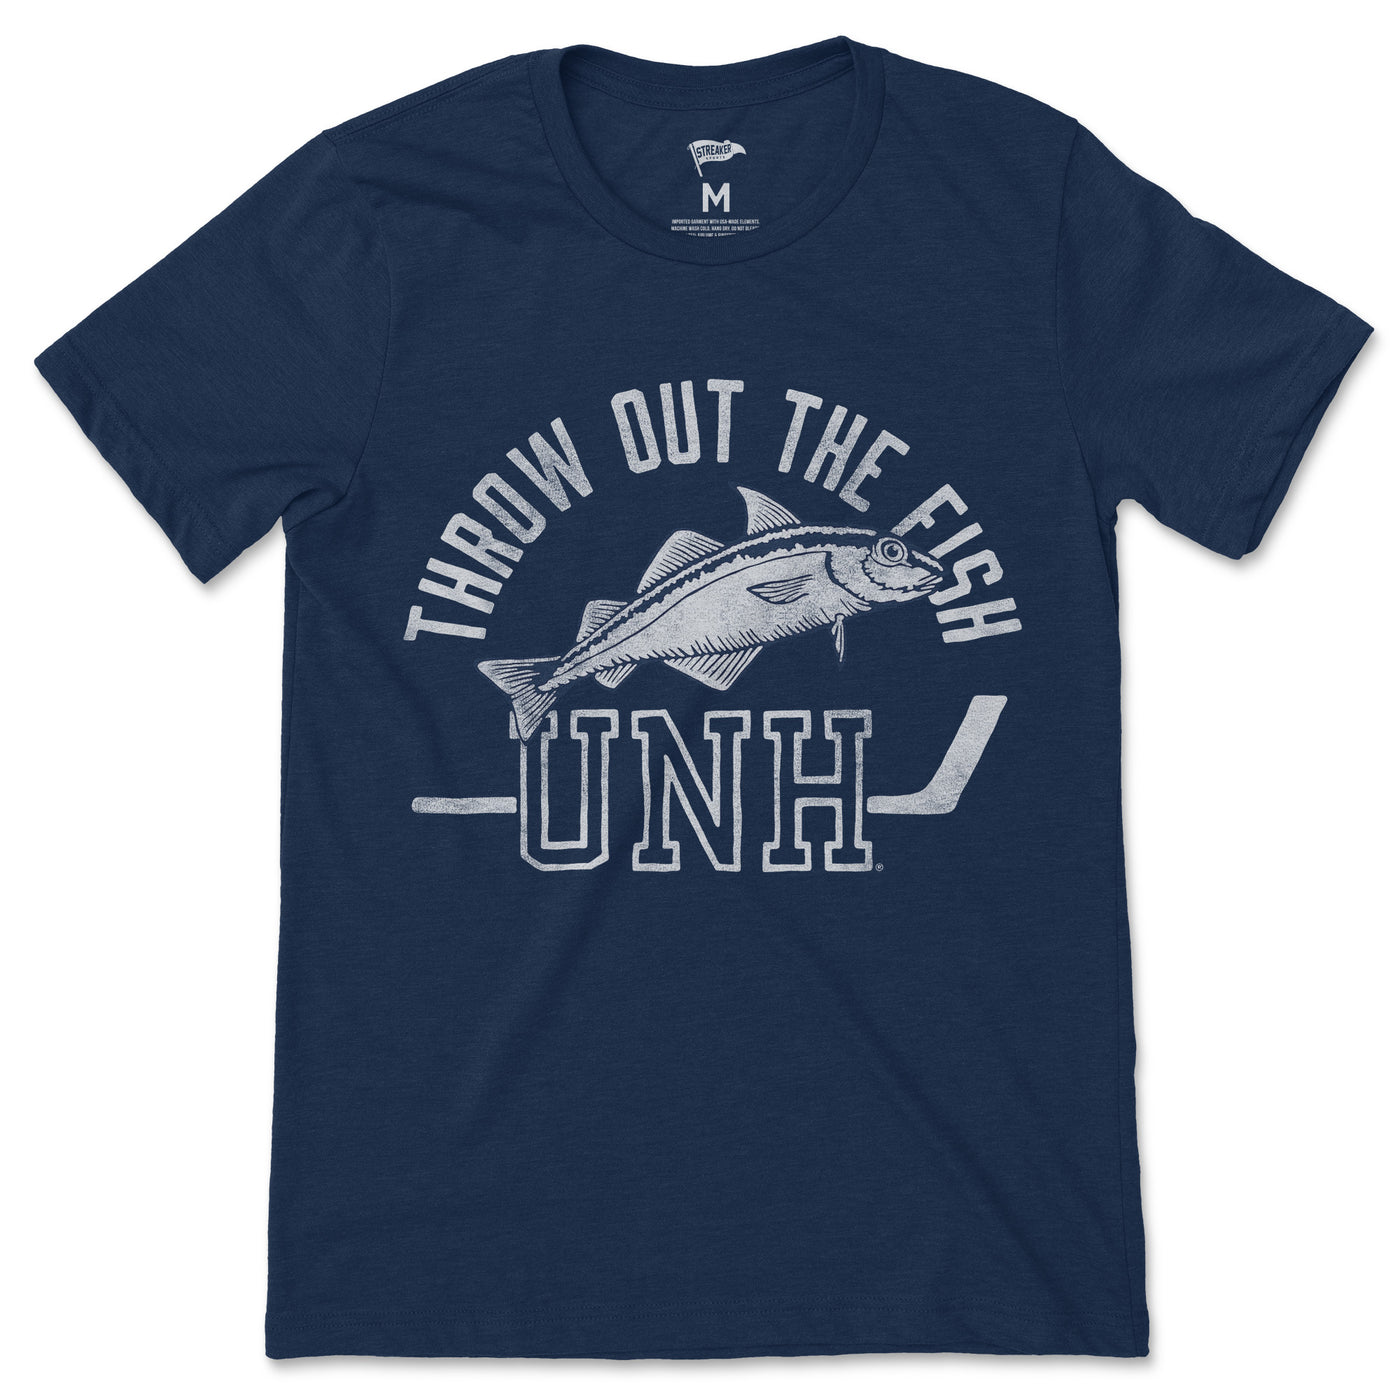 UNH Throw Out The Fish Hockey Tee - Streaker Sports